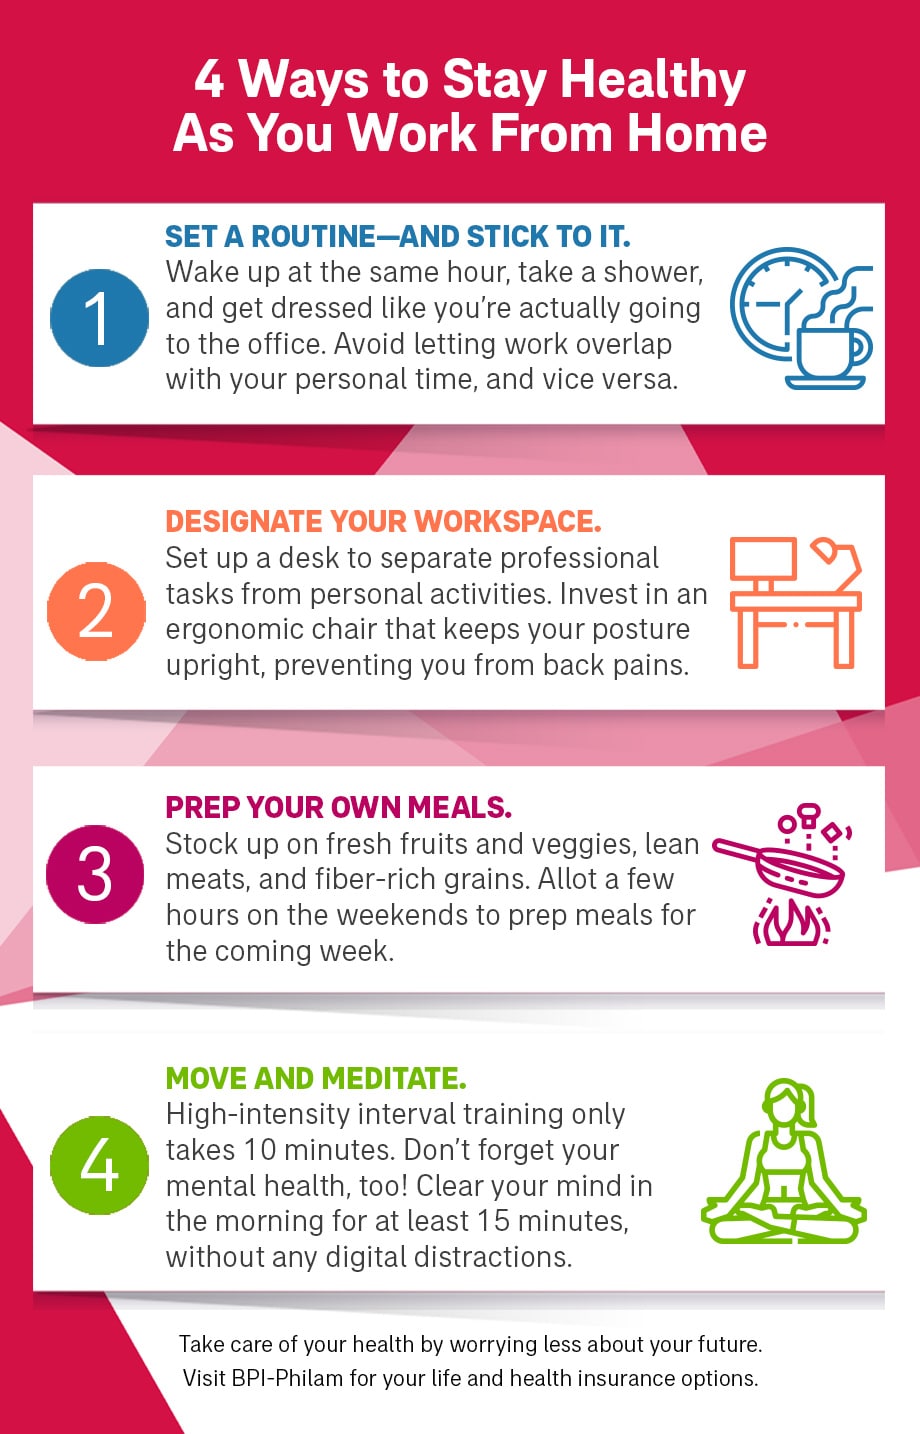 4 Ways to Stay Healthy As You Work From Home Infographic